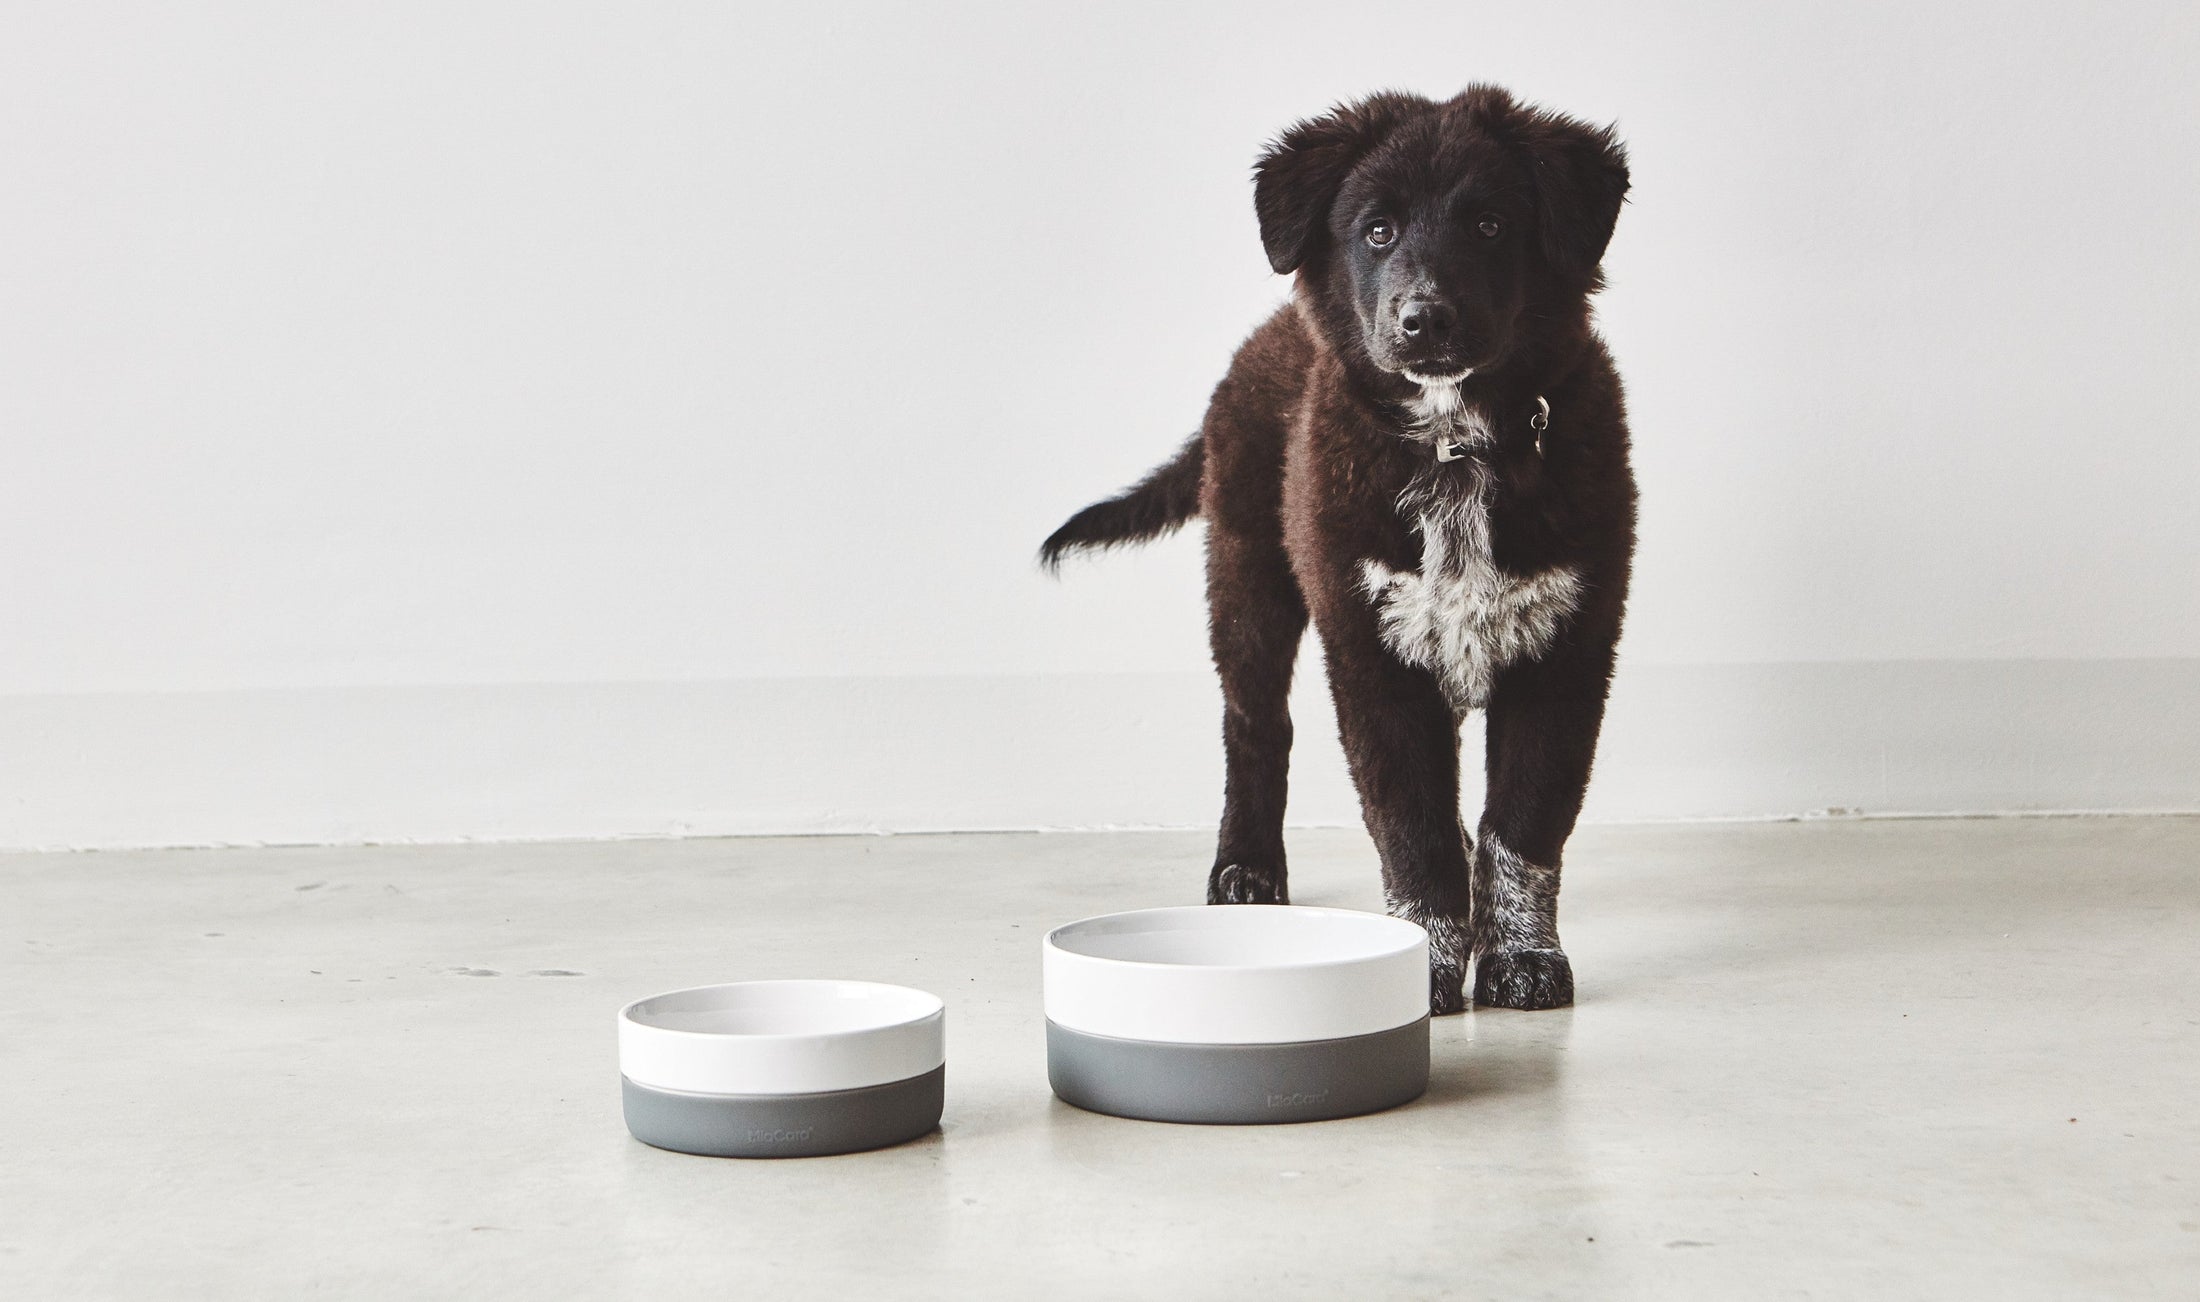 Functional and chic the pet bowl by Coppa for pets